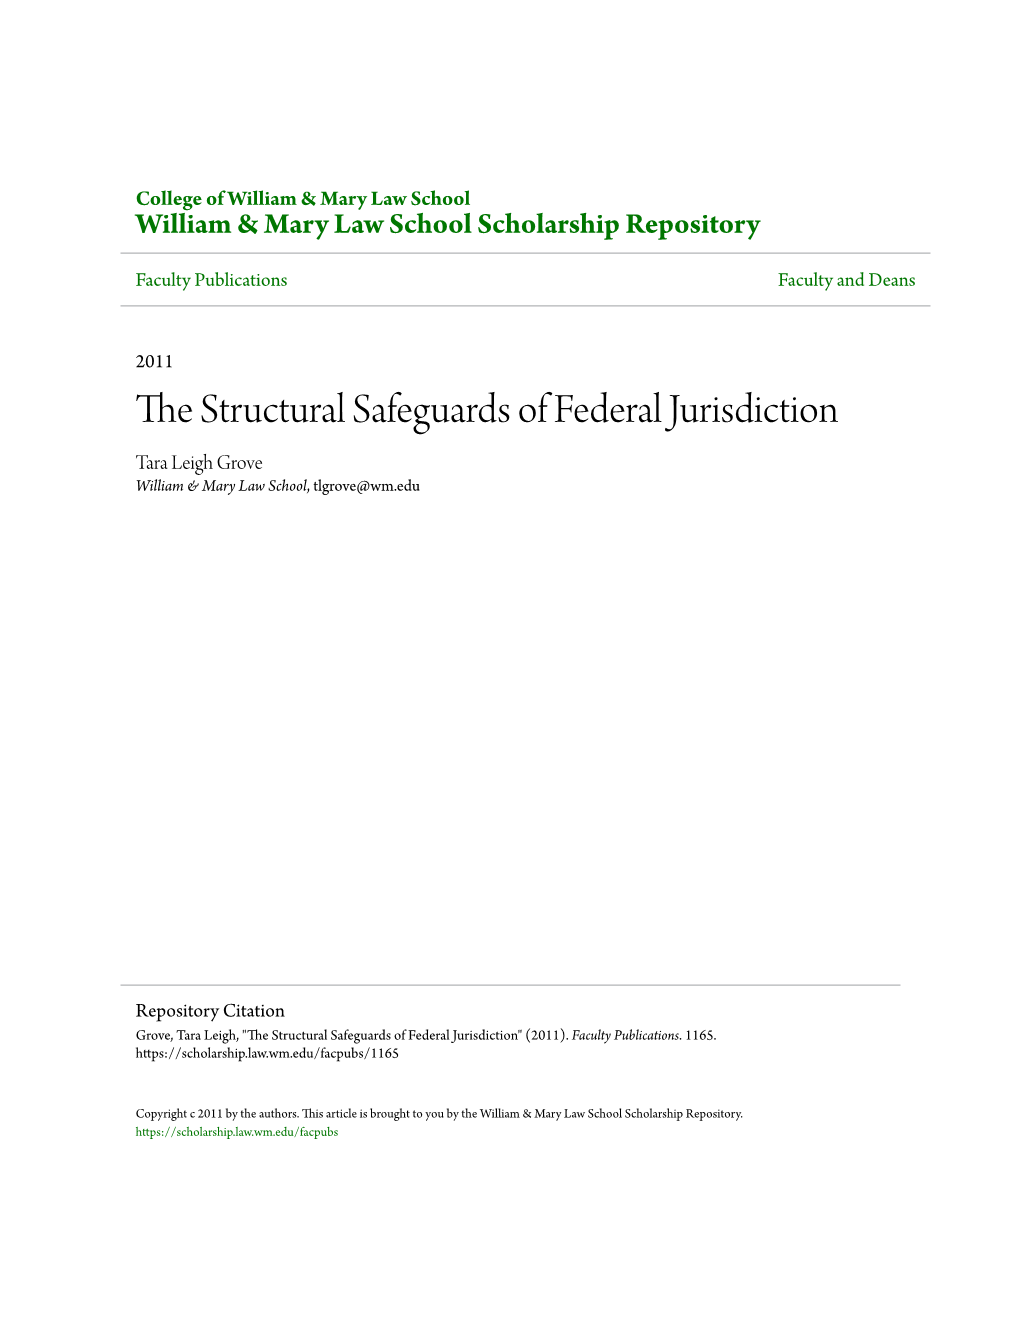 The Structural Safeguards of Federal Jurisdiction